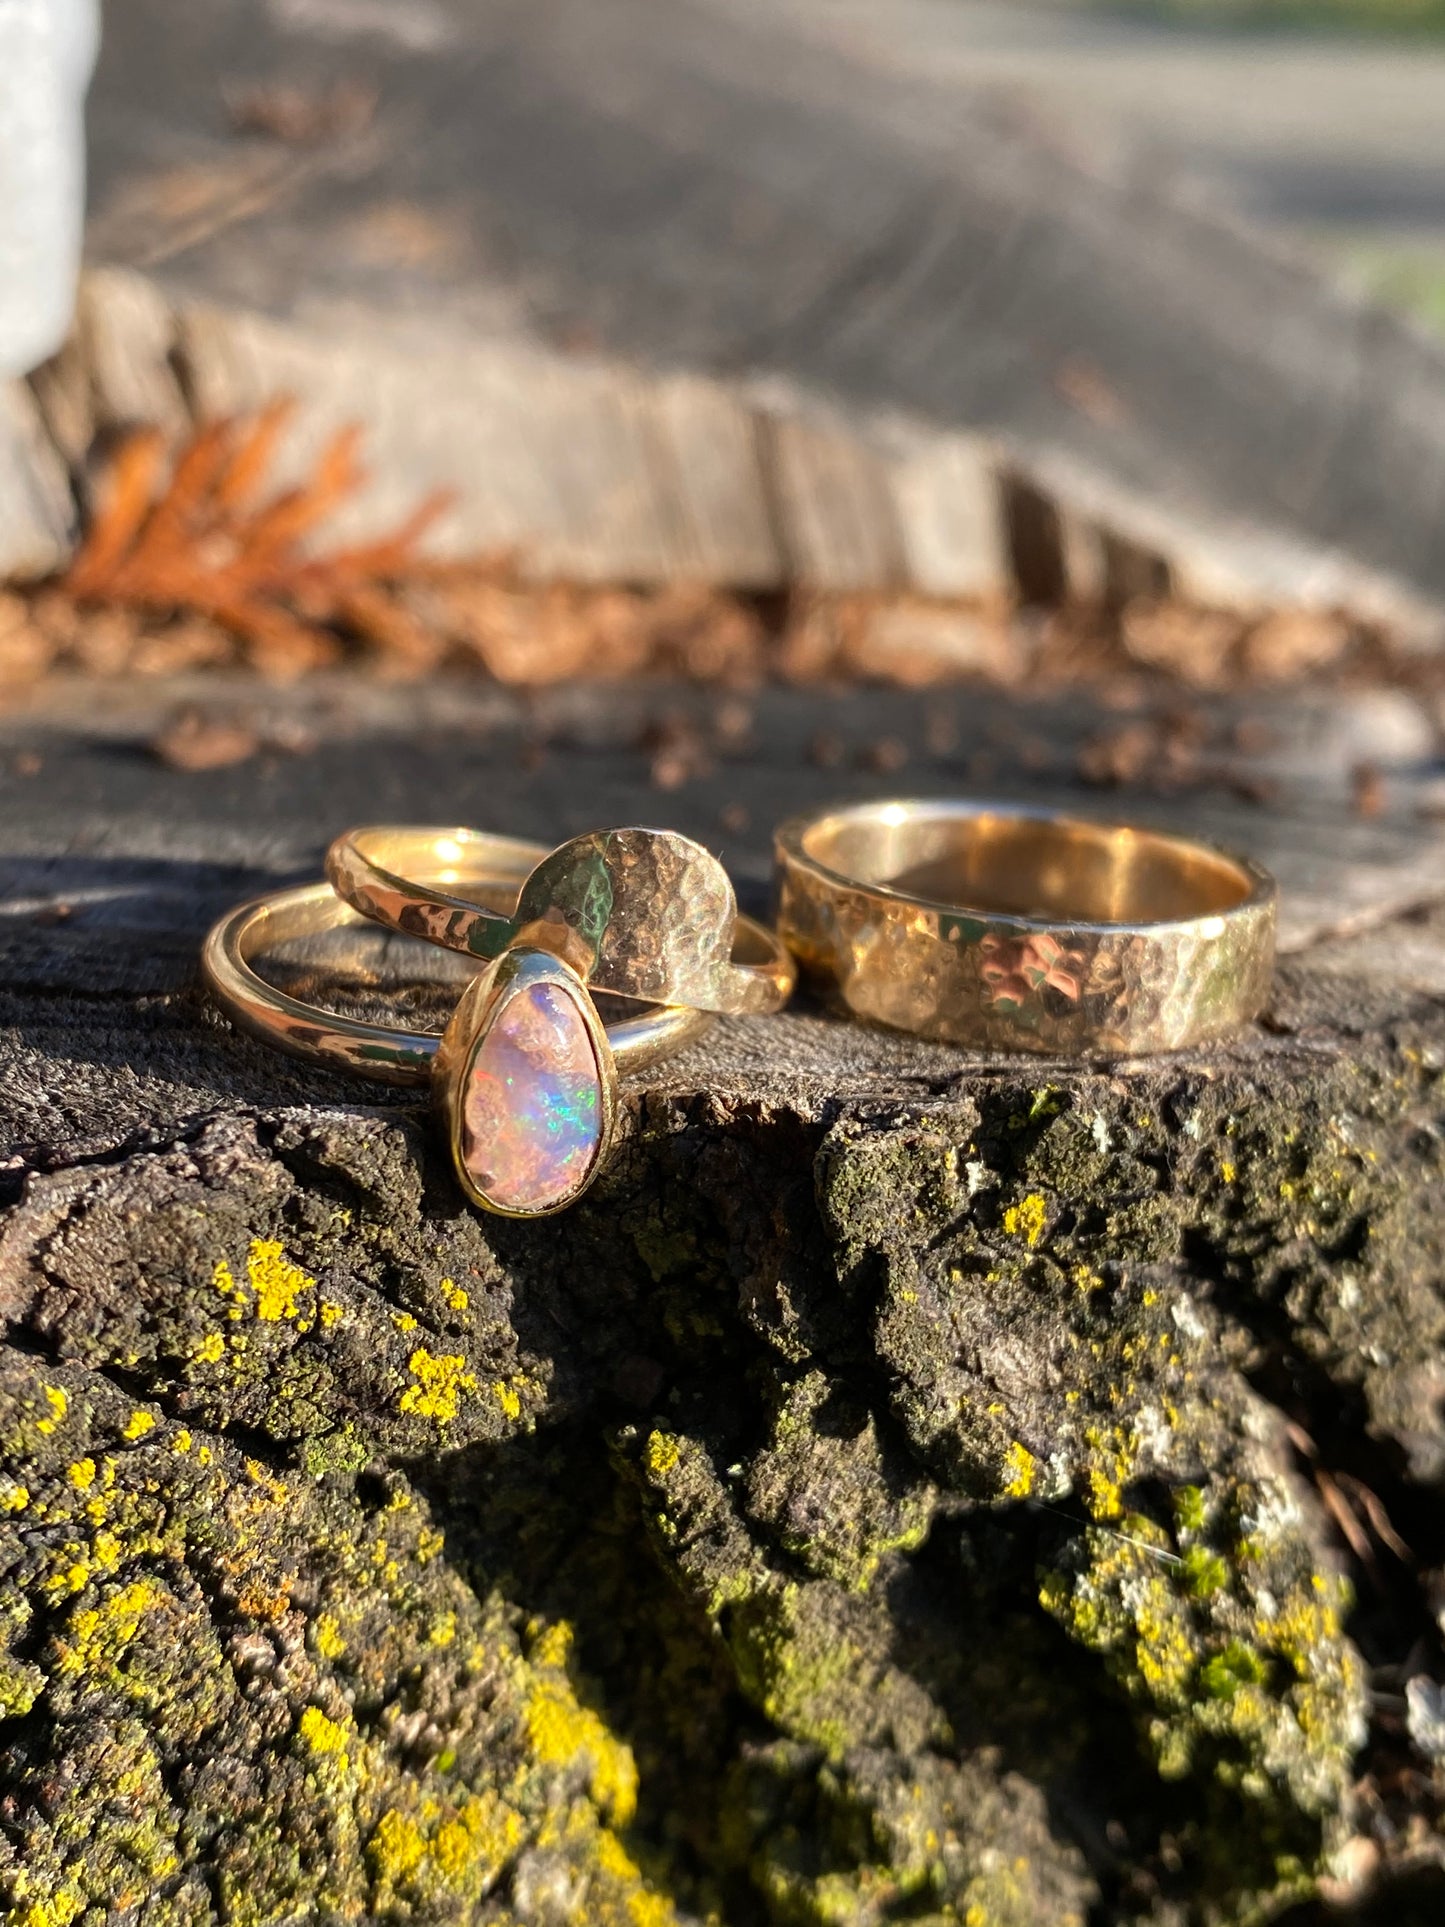 Previous custom his/hers engagement and wedding ring set